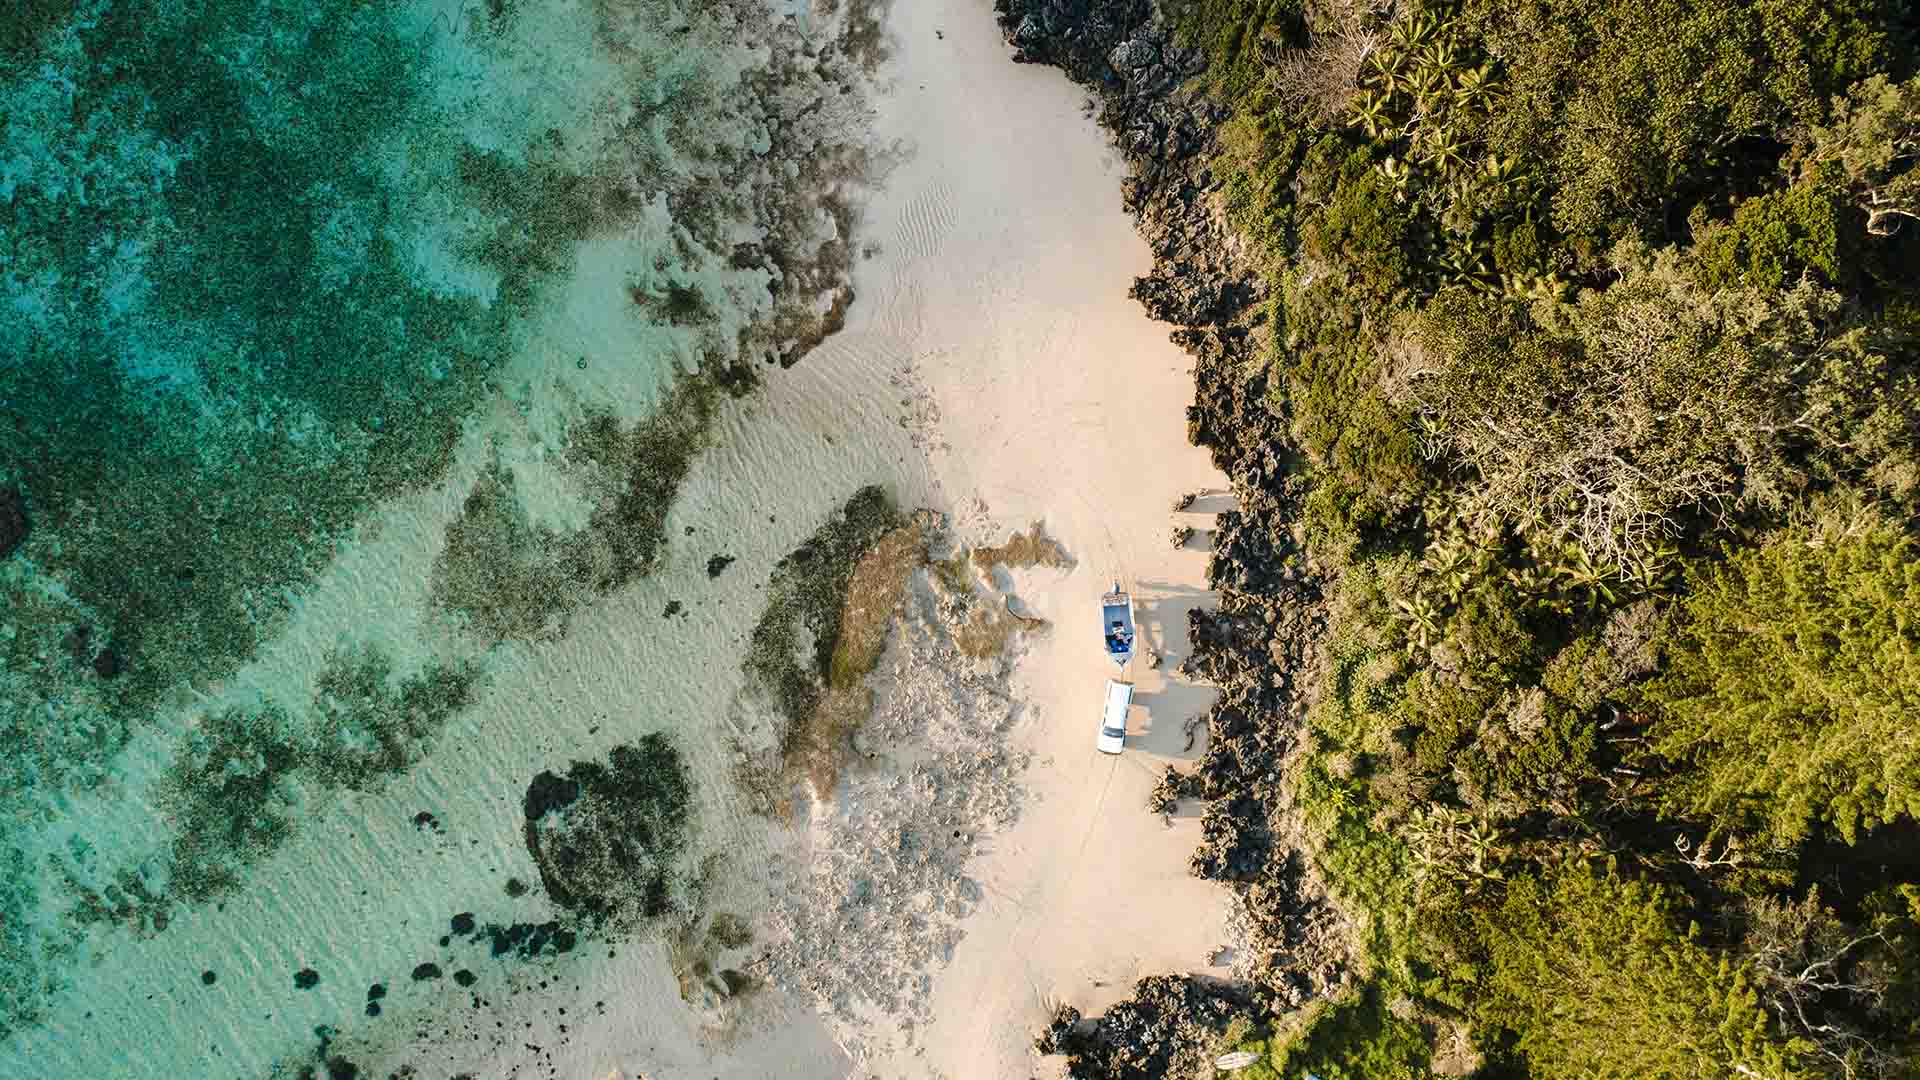 Lord Howe Island Has Been Named One of the Best Places to Visit in 2020 by Lonely Planet